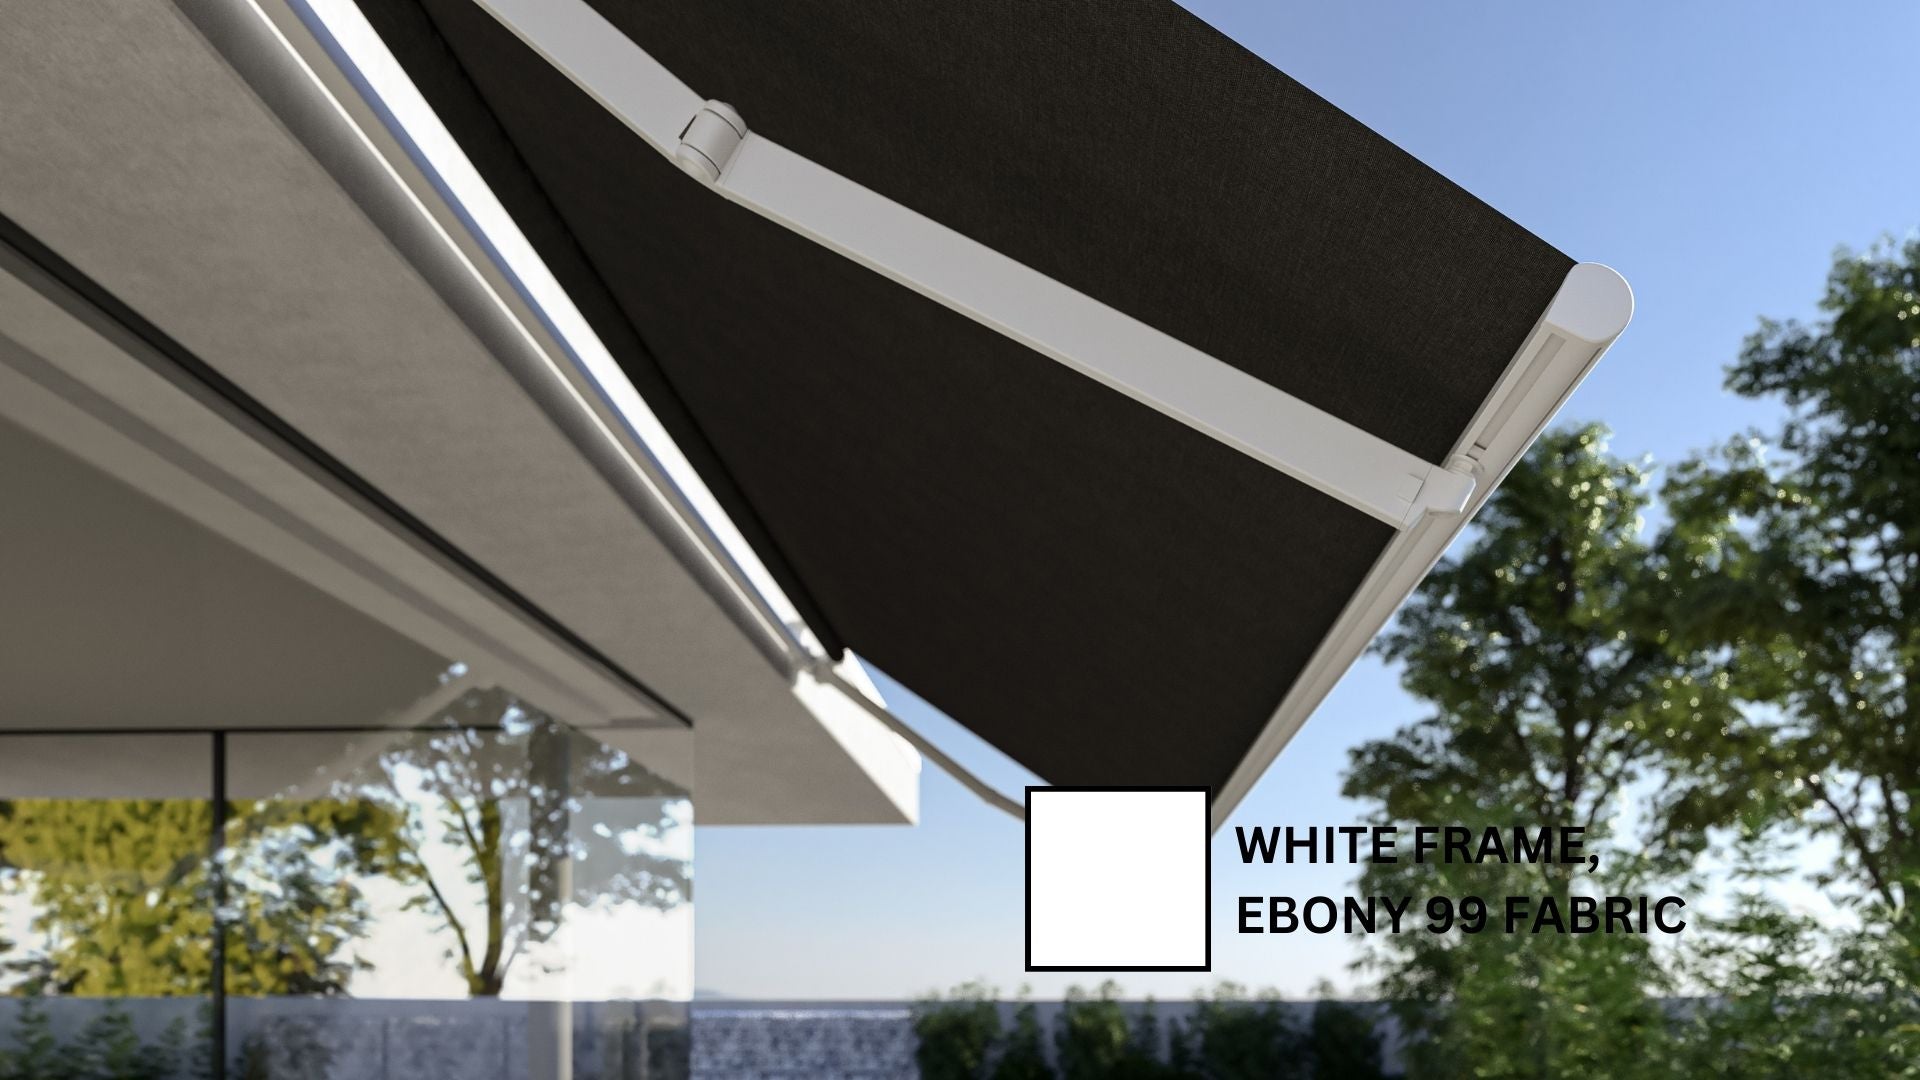 Folding Arm Awning - Ozrite – DIY Outdoor Blinds Online